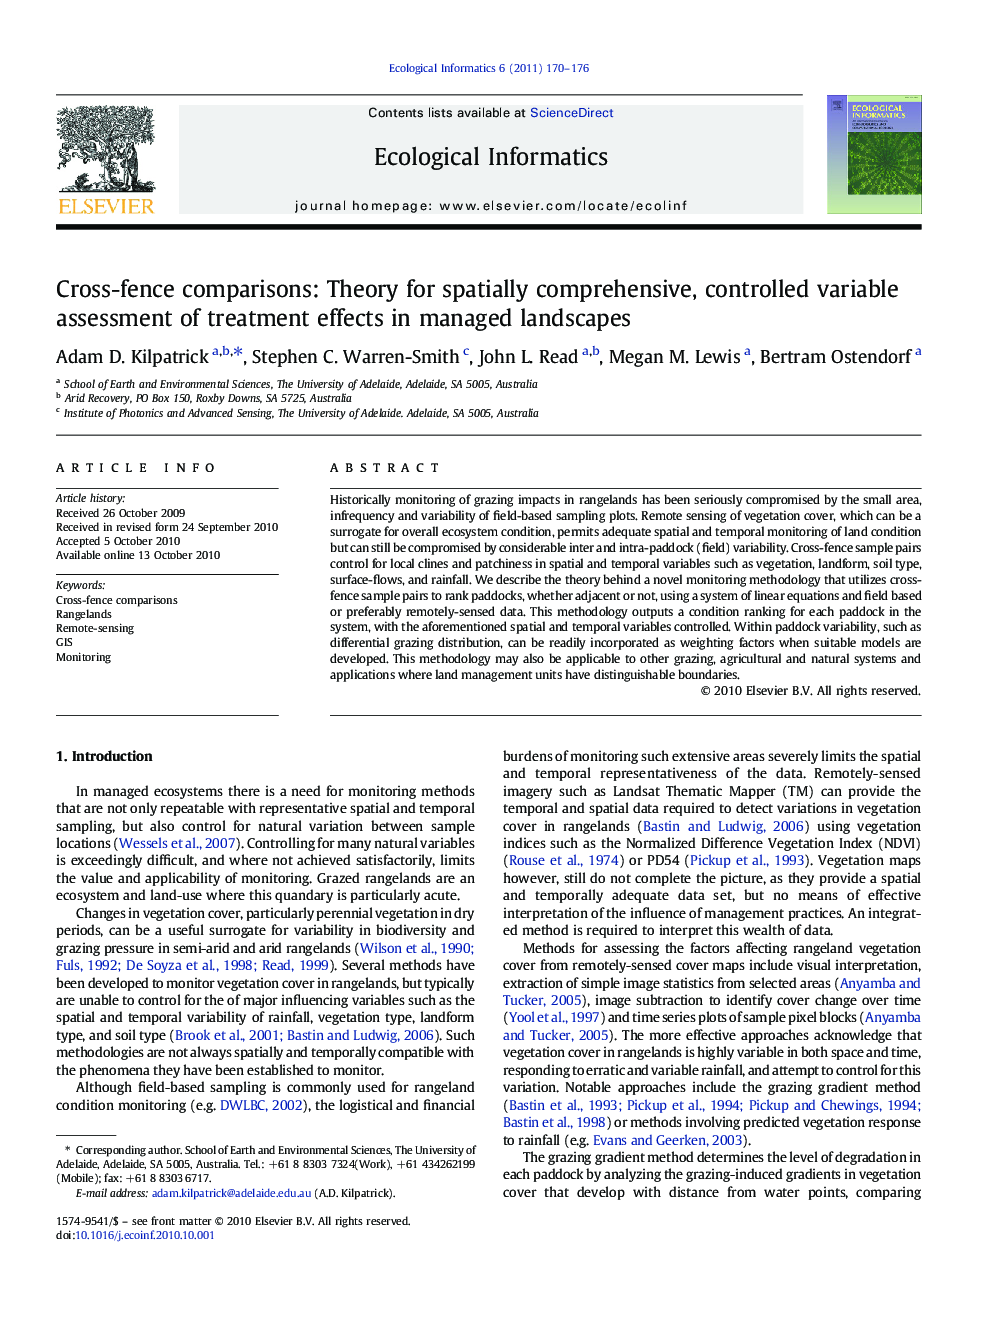 Cross-fence comparisons: Theory for spatially comprehensive, controlled variable assessment of treatment effects in managed landscapes